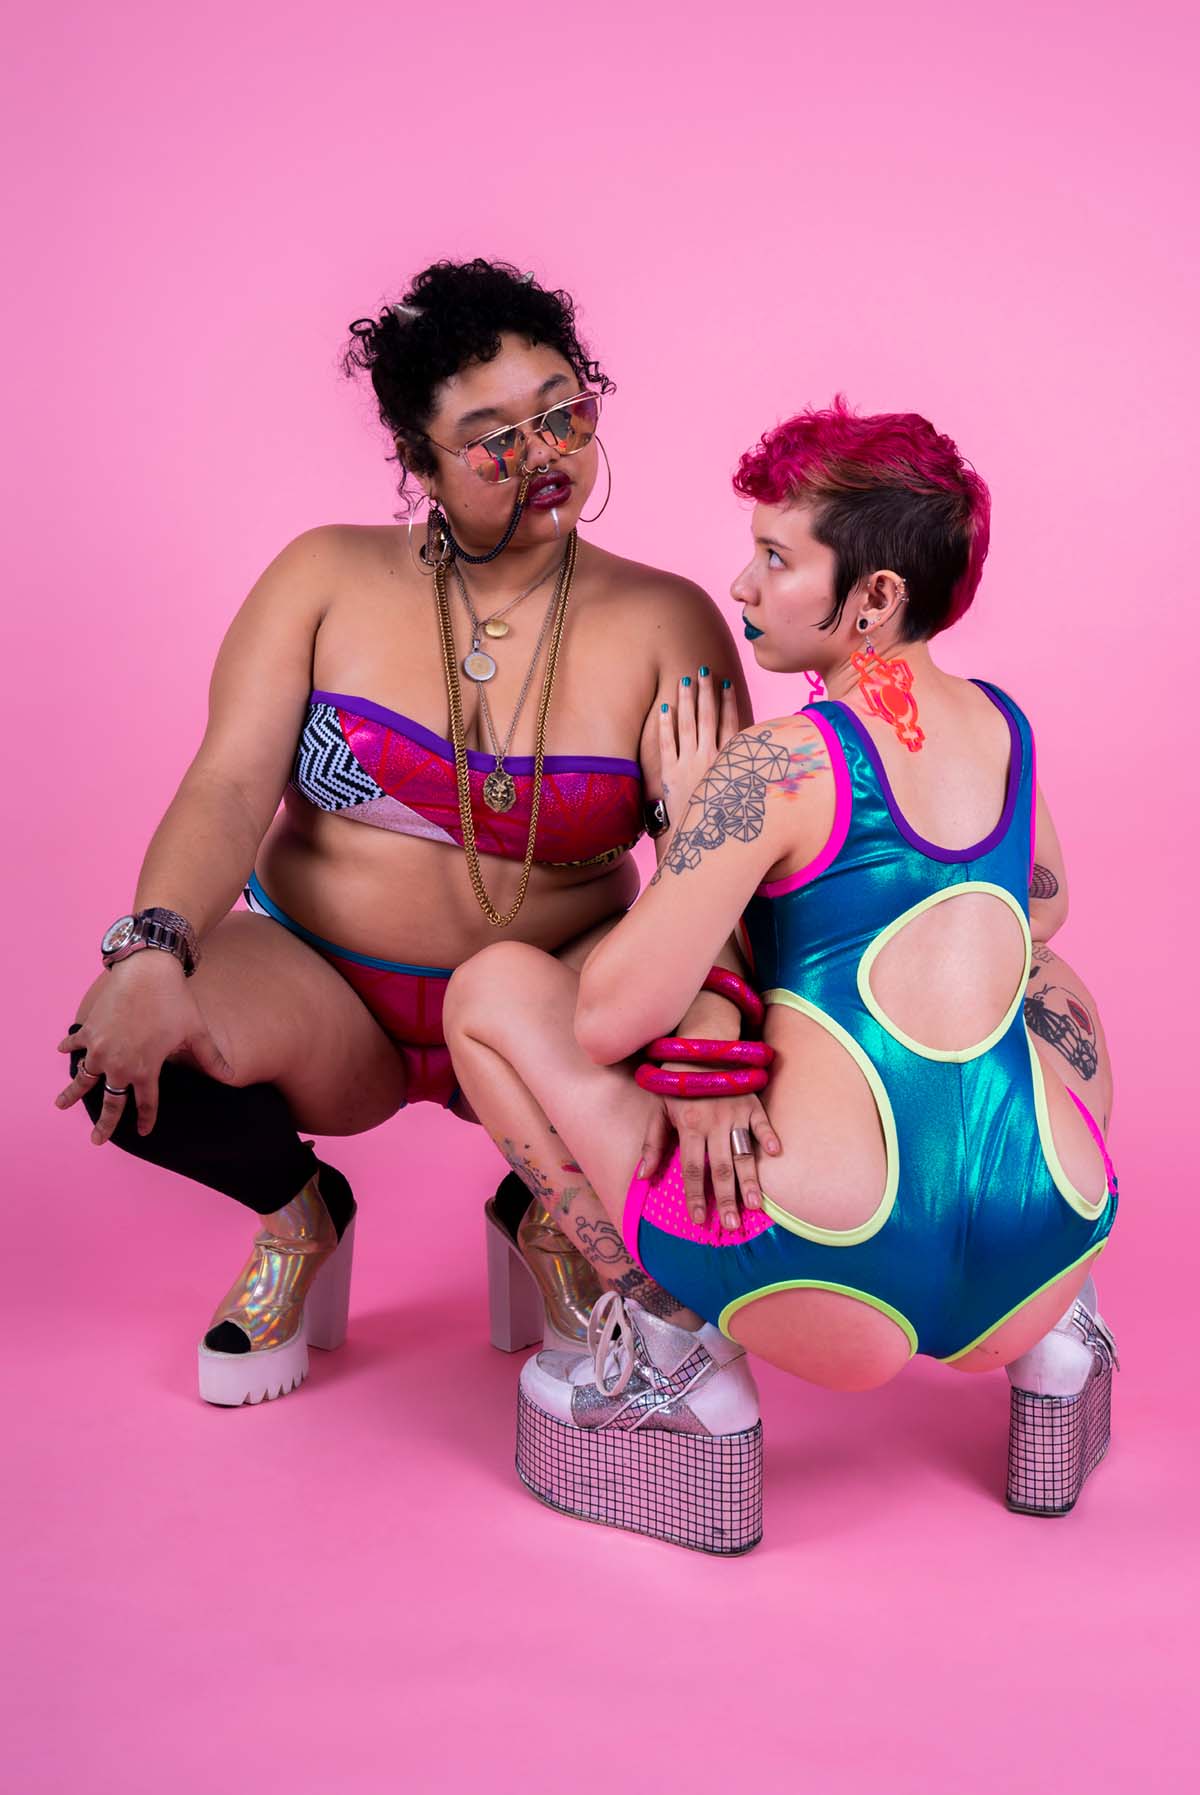 Two people posing in front of a pink backdrop wearing colorful spandex clothing by Rebirth Garments